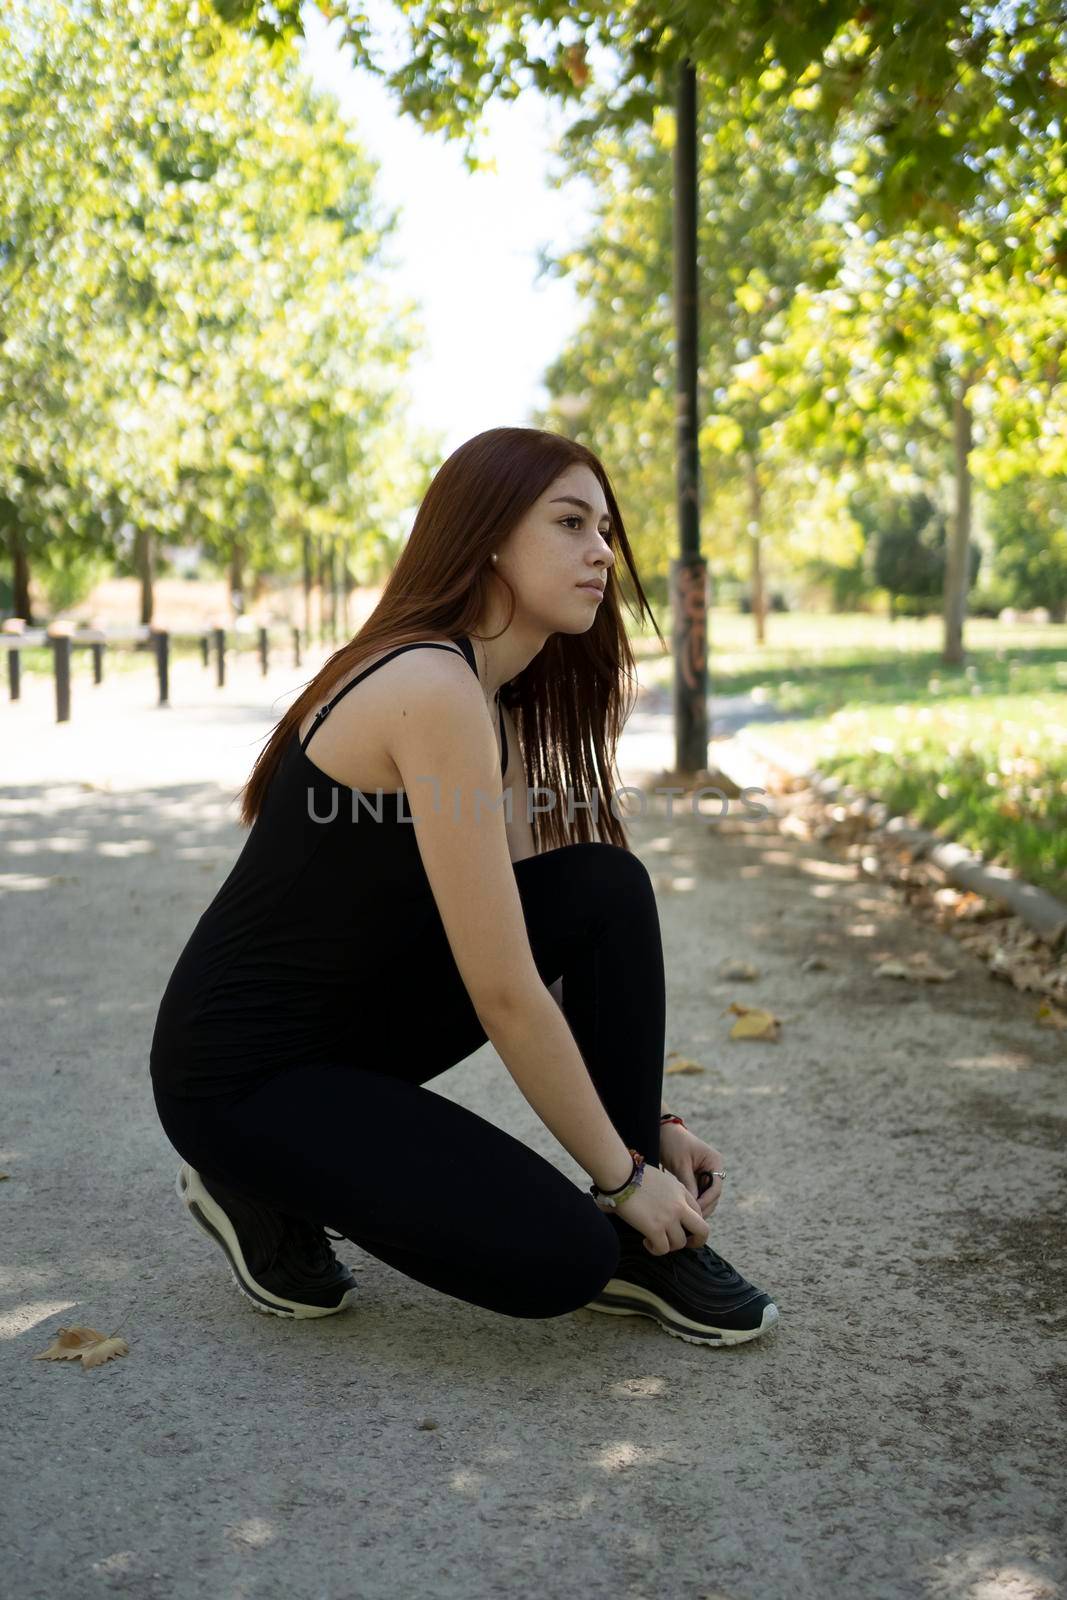 Young modern woman tying running shoes in urban park. by barcielaphoto